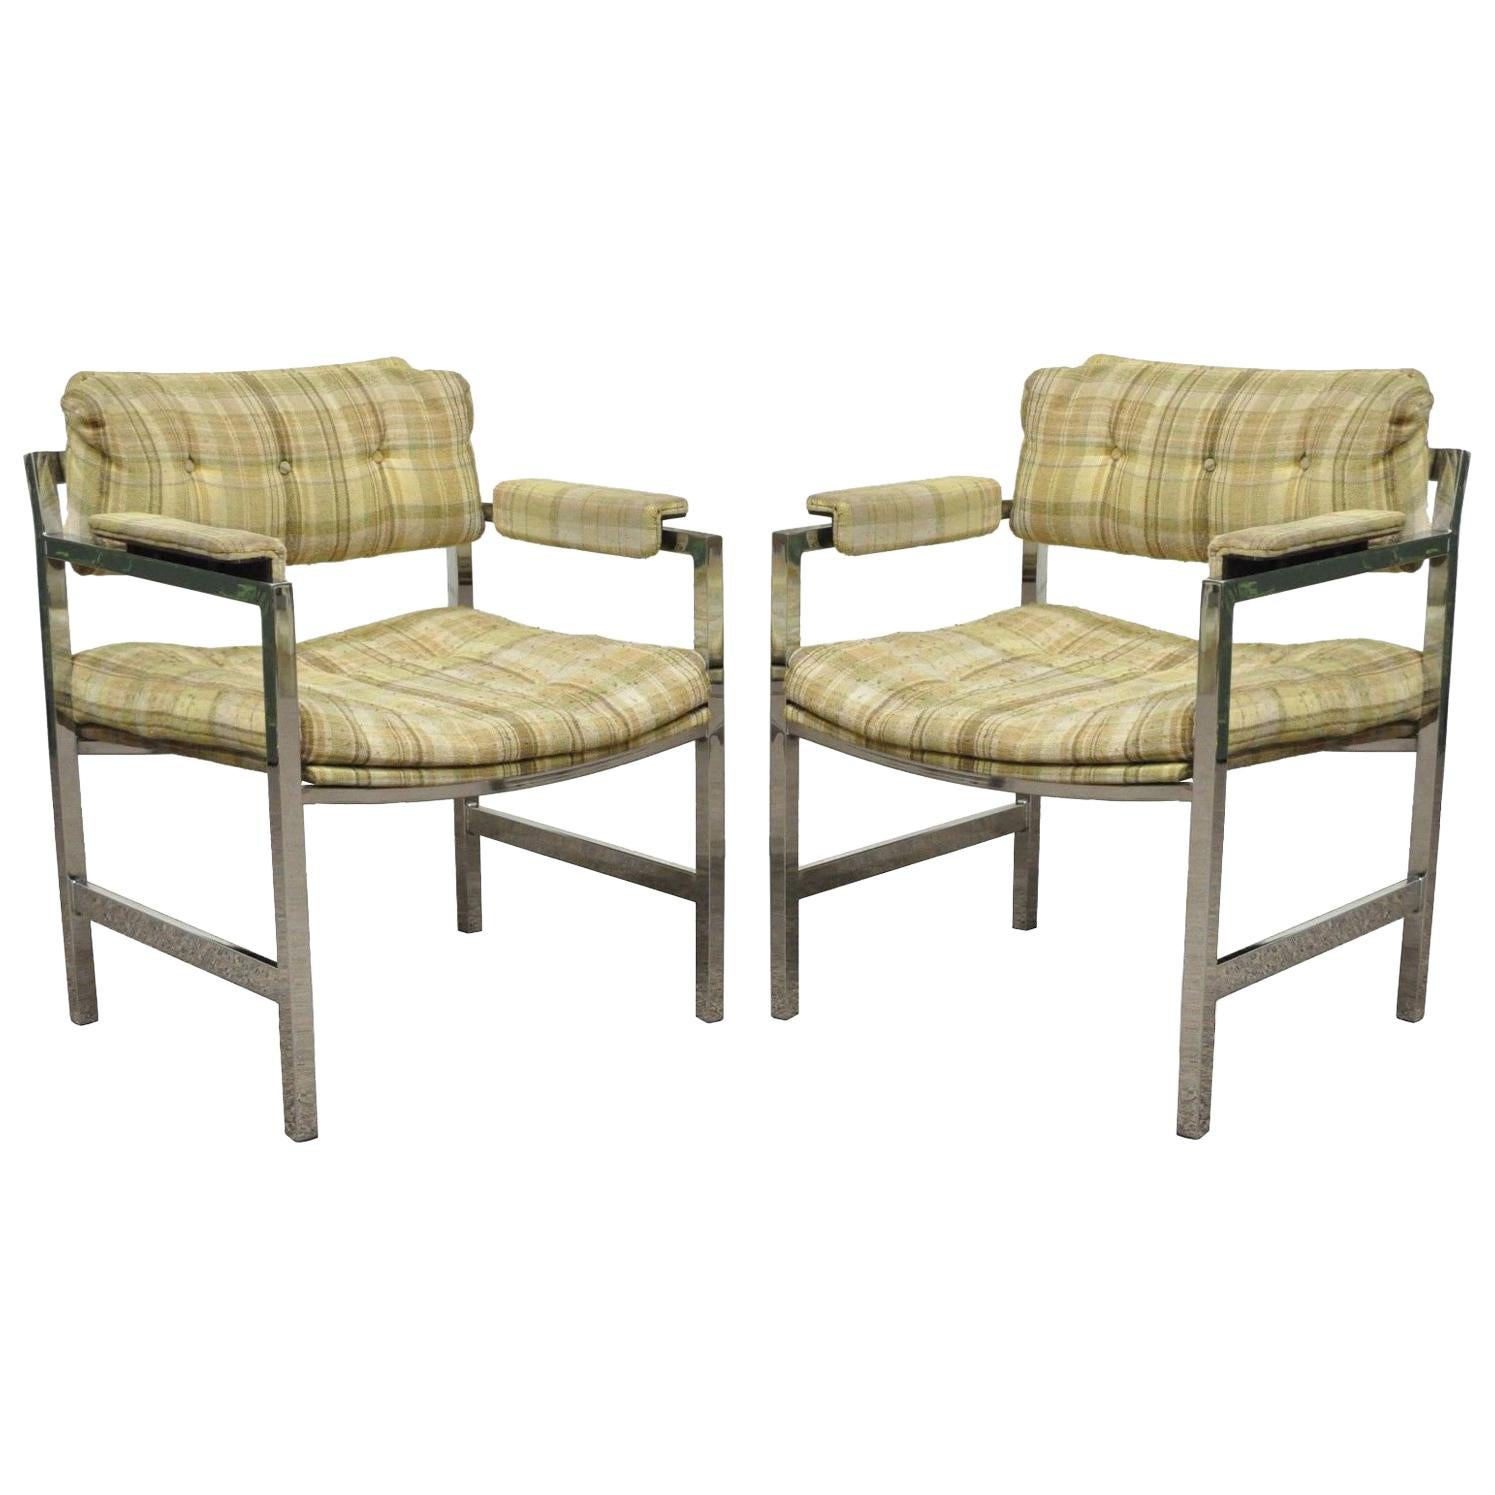 Pair of Mid-Century Modern Baughman Chrome Floating Arm Lounge Chairs